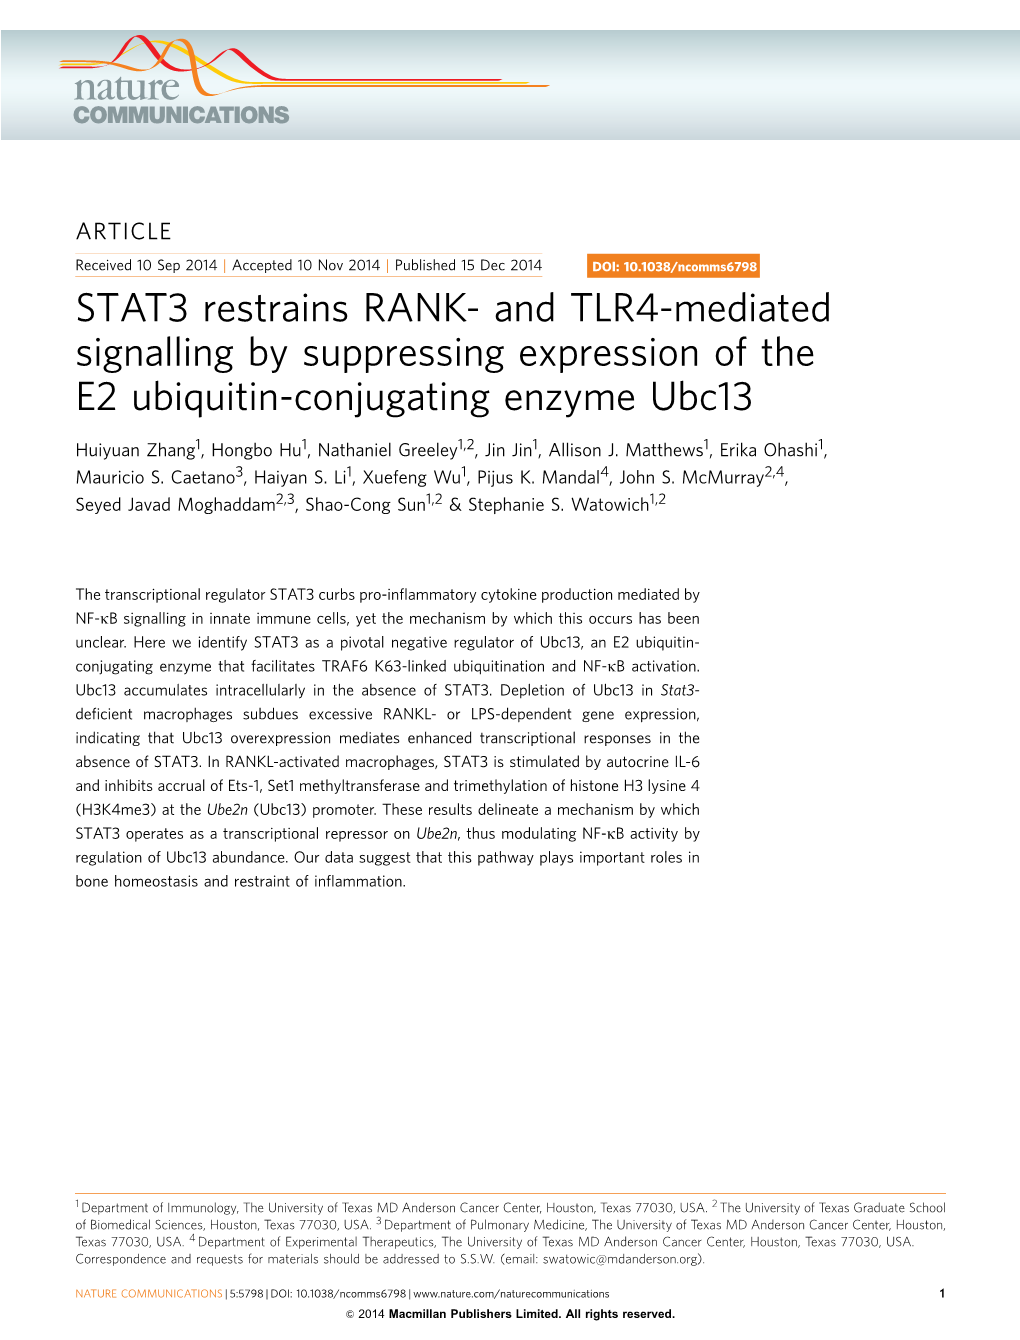 STAT3 Restrains RANK- and TLR4-Mediated Signalling by Suppressing Expression of the E2 Ubiquitin-Conjugating Enzyme Ubc13